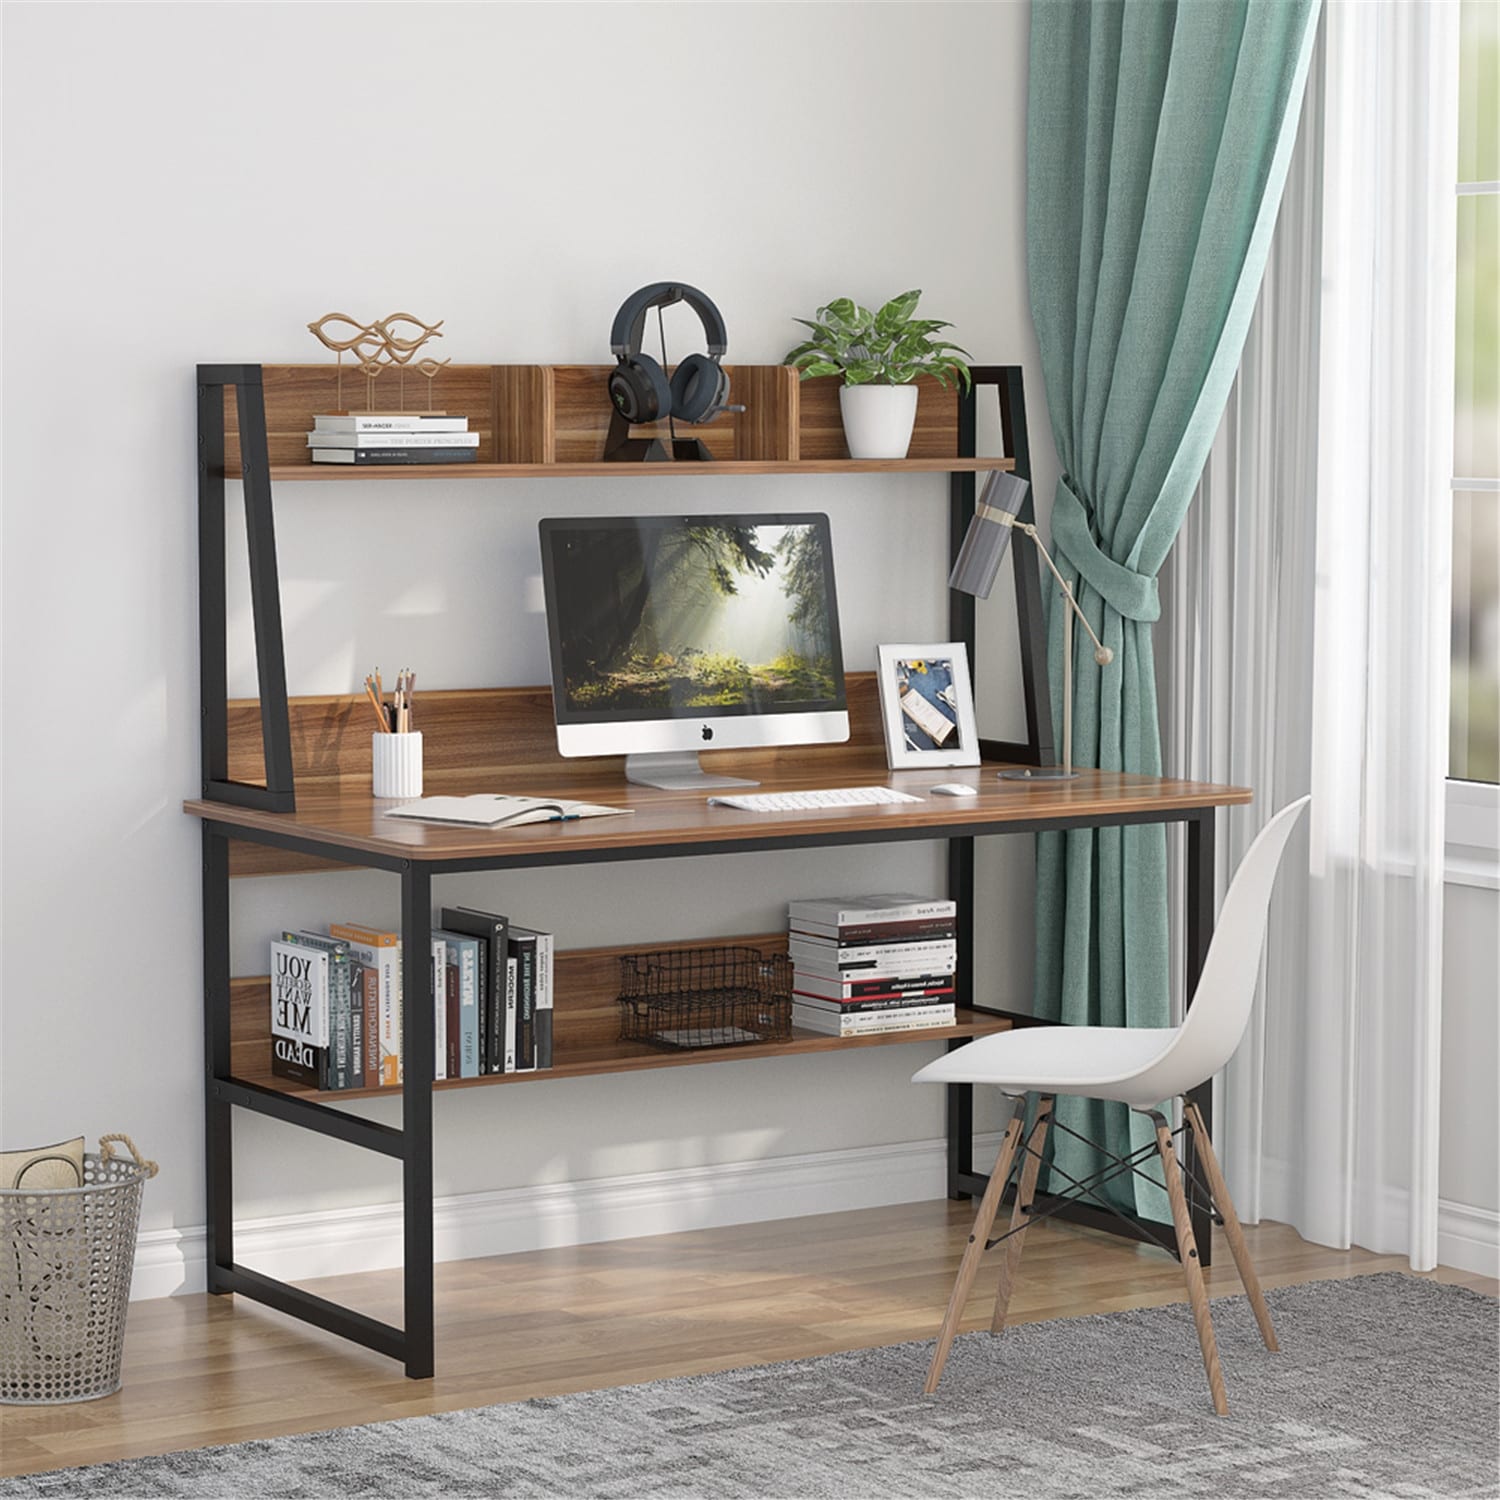 https://ak1.ostkcdn.com/images/products/is/images/direct/9e73ff0b0cce14b299c6e726db992b088d477334/47-Inches%C2%A0Computer-Desk-with-Hutch-and-Bookshelf%2C-Home-Office-Desk.jpg